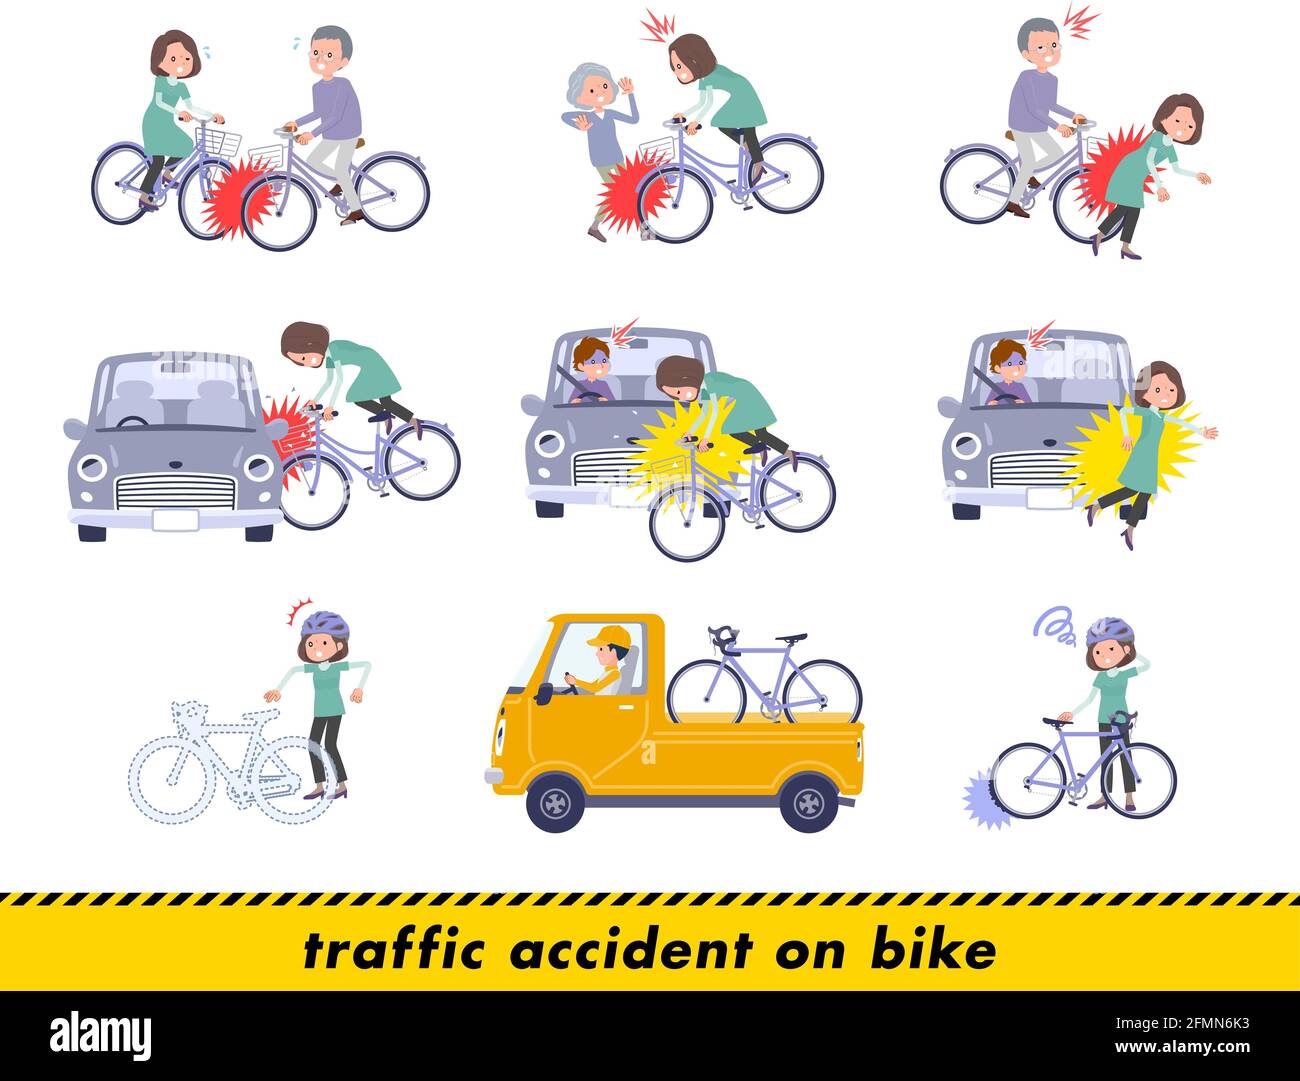 A set of middle-aged women in tunic in a bicycle accident.It's vector art so easy to edit. Stock Vector